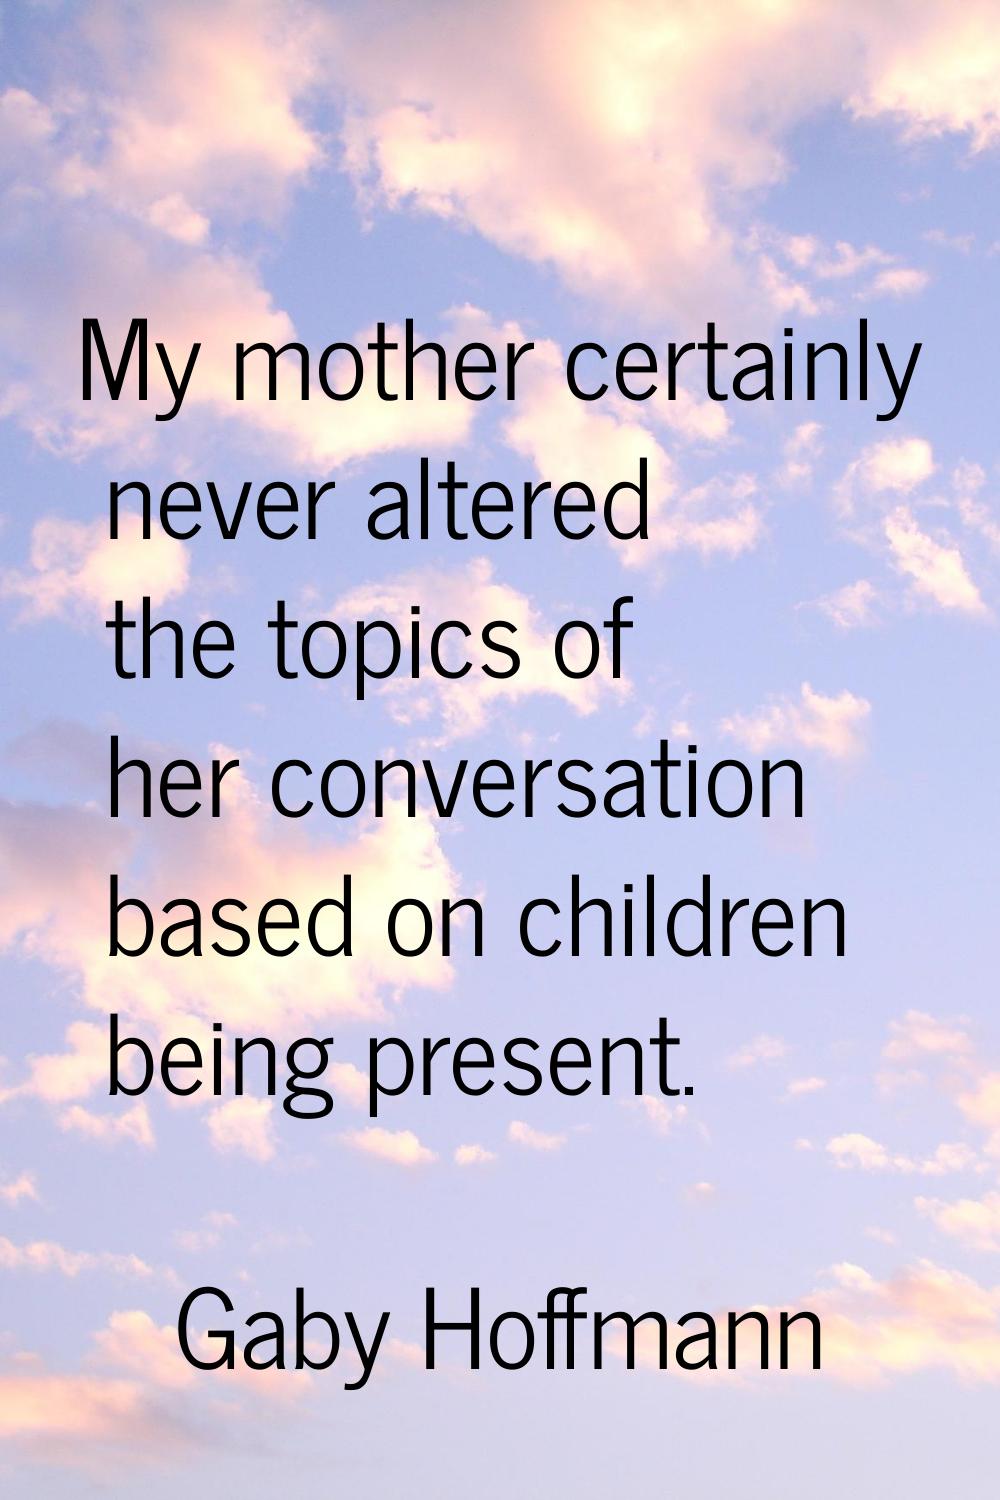 My mother certainly never altered the topics of her conversation based on children being present.